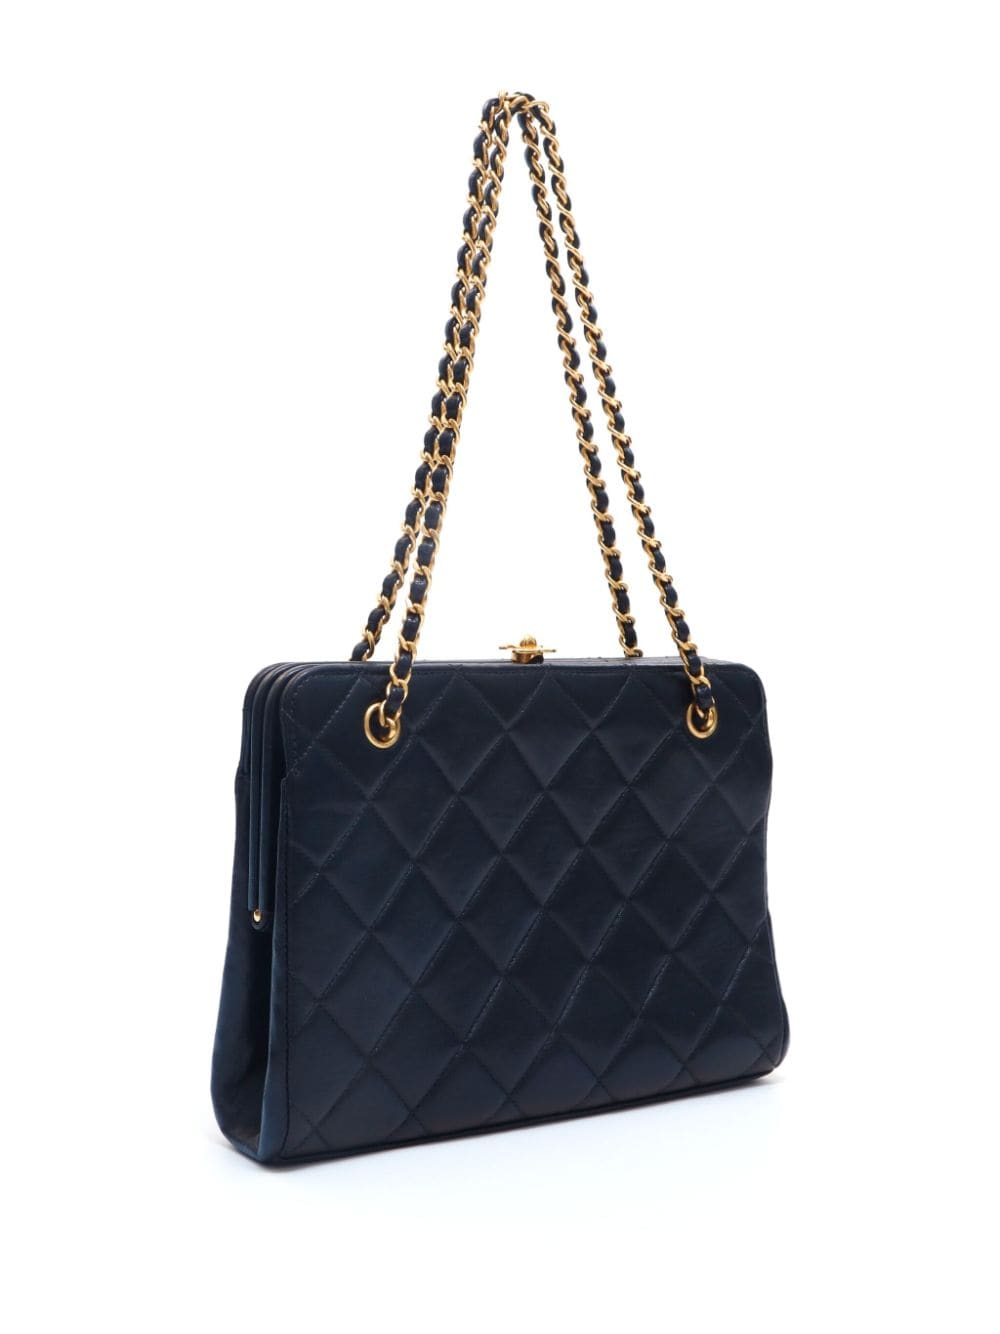 Pre-owned Chanel 1997 Diamond-quilted Shoulder Bag In Black